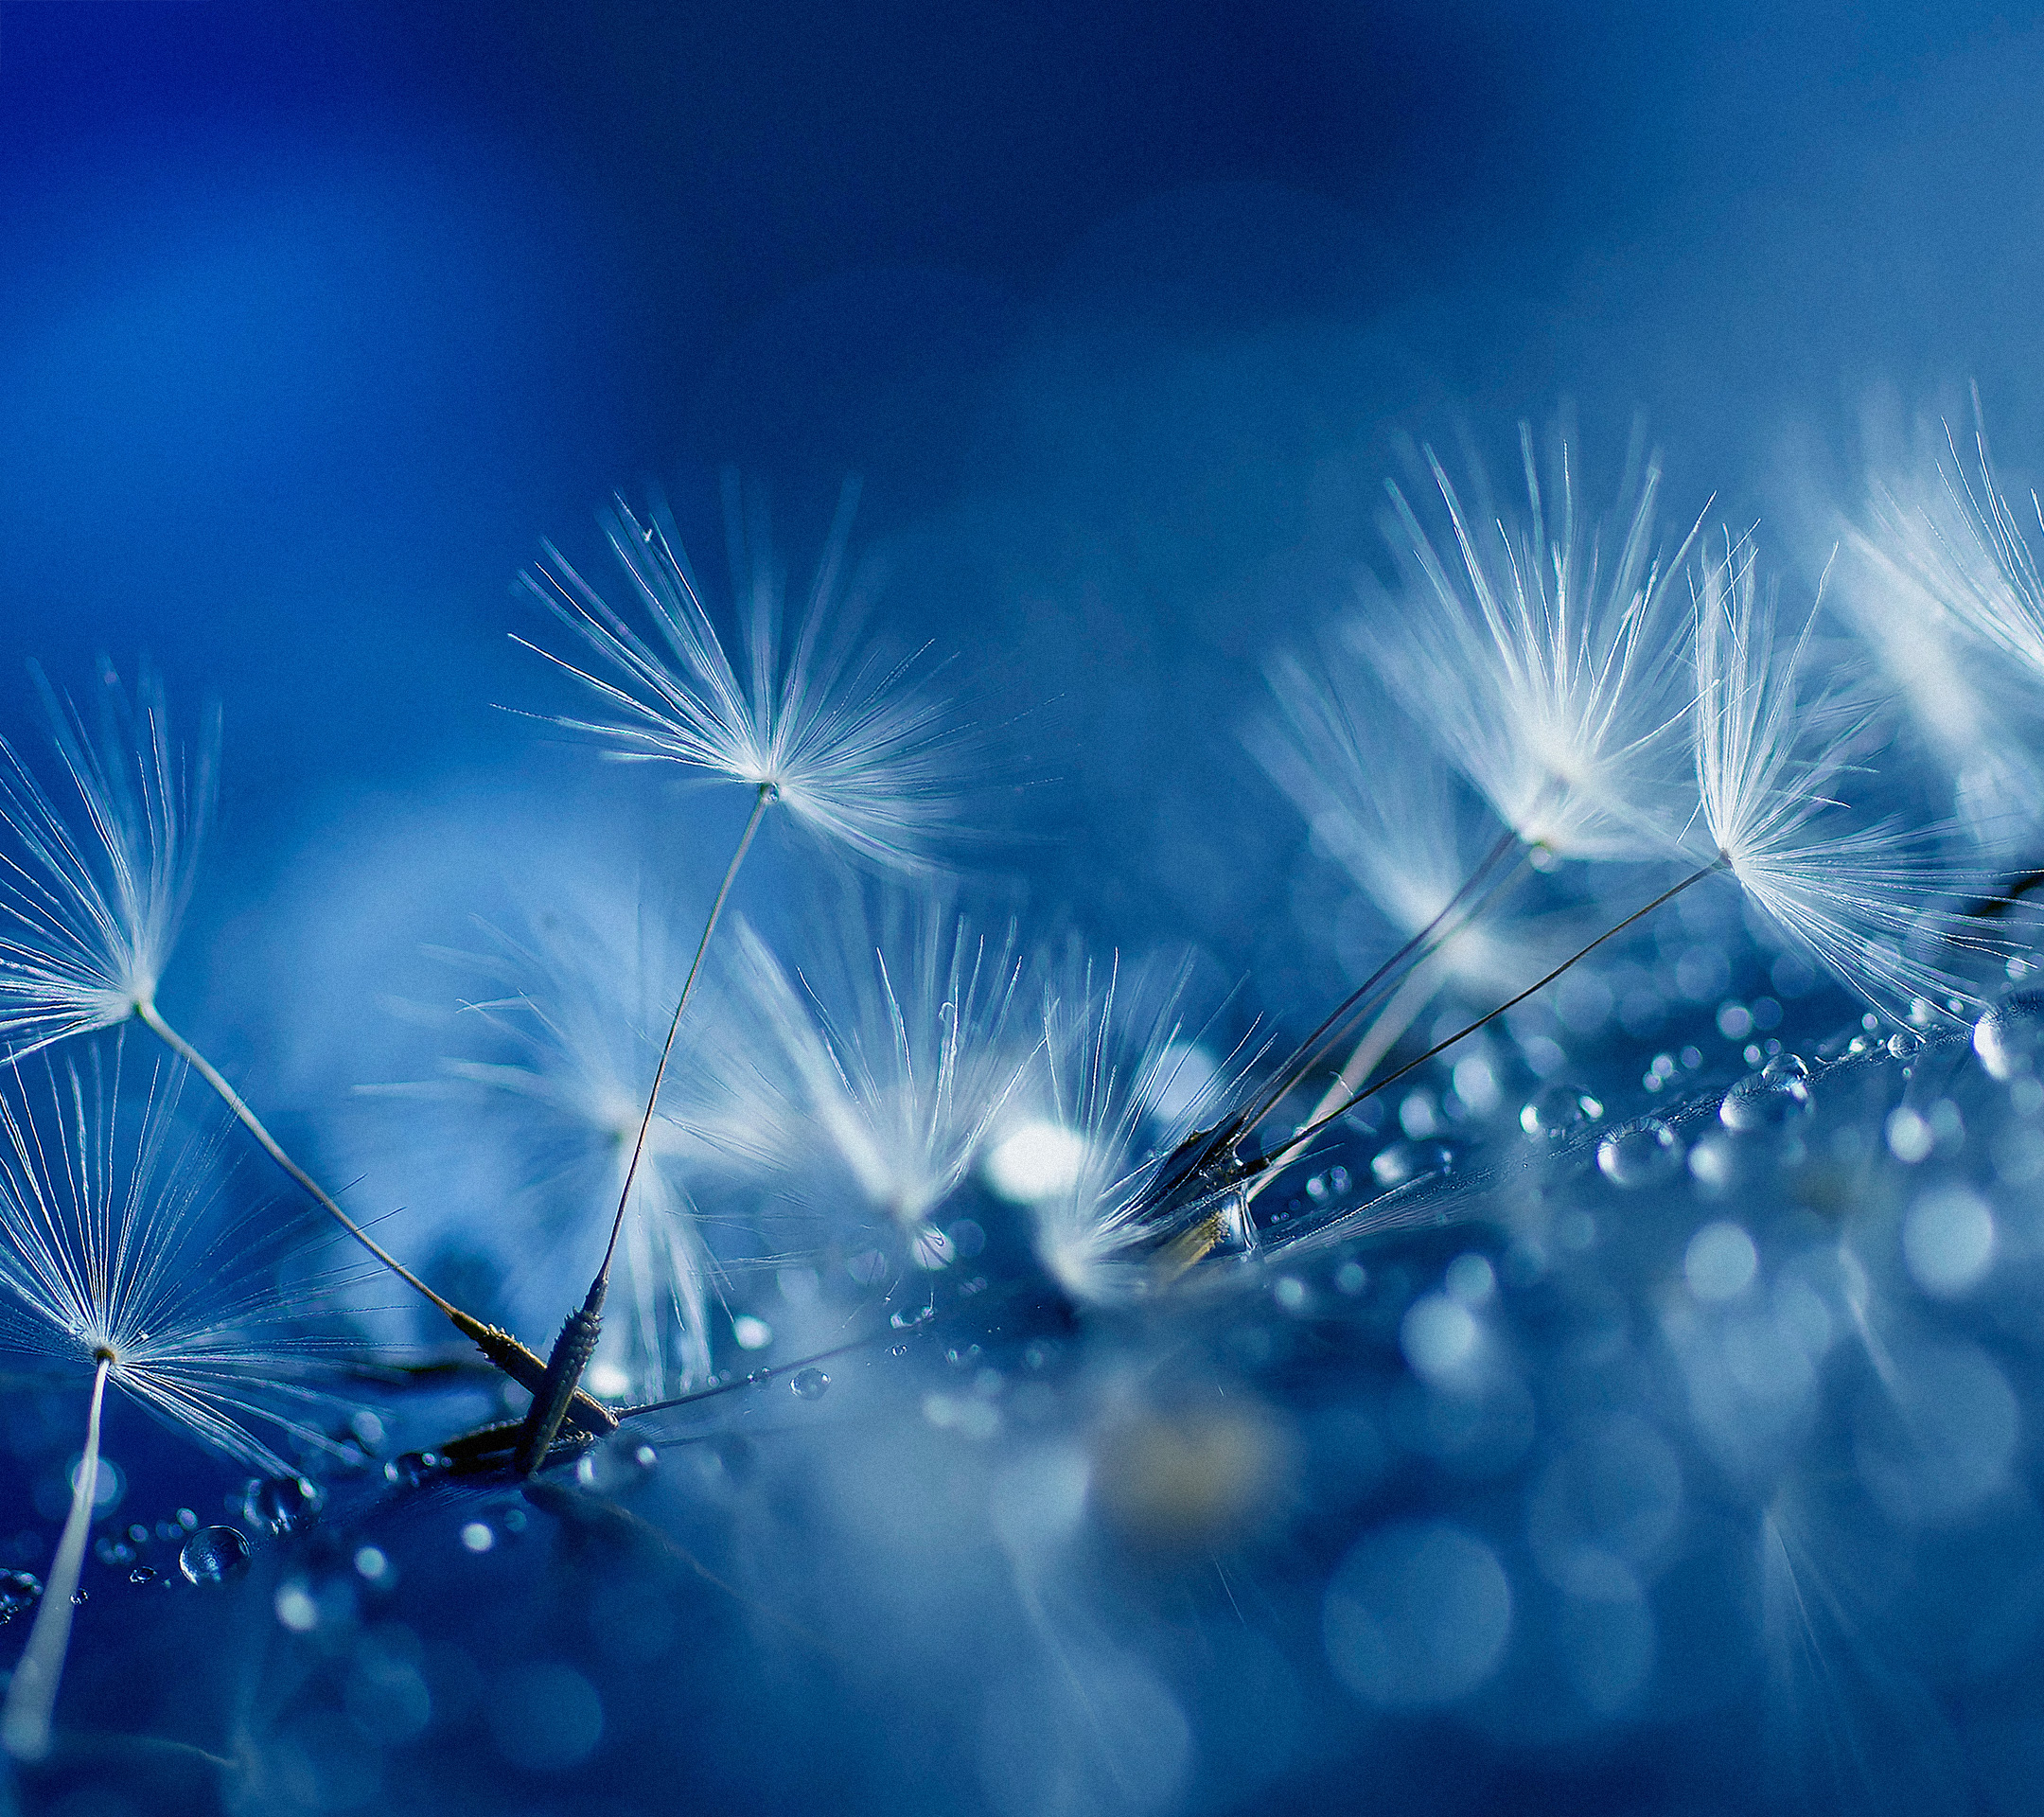 Image From All 18 Built-in Htc One M8 Wallpapers Leak - Cute Rain Drops To Flowers , HD Wallpaper & Backgrounds